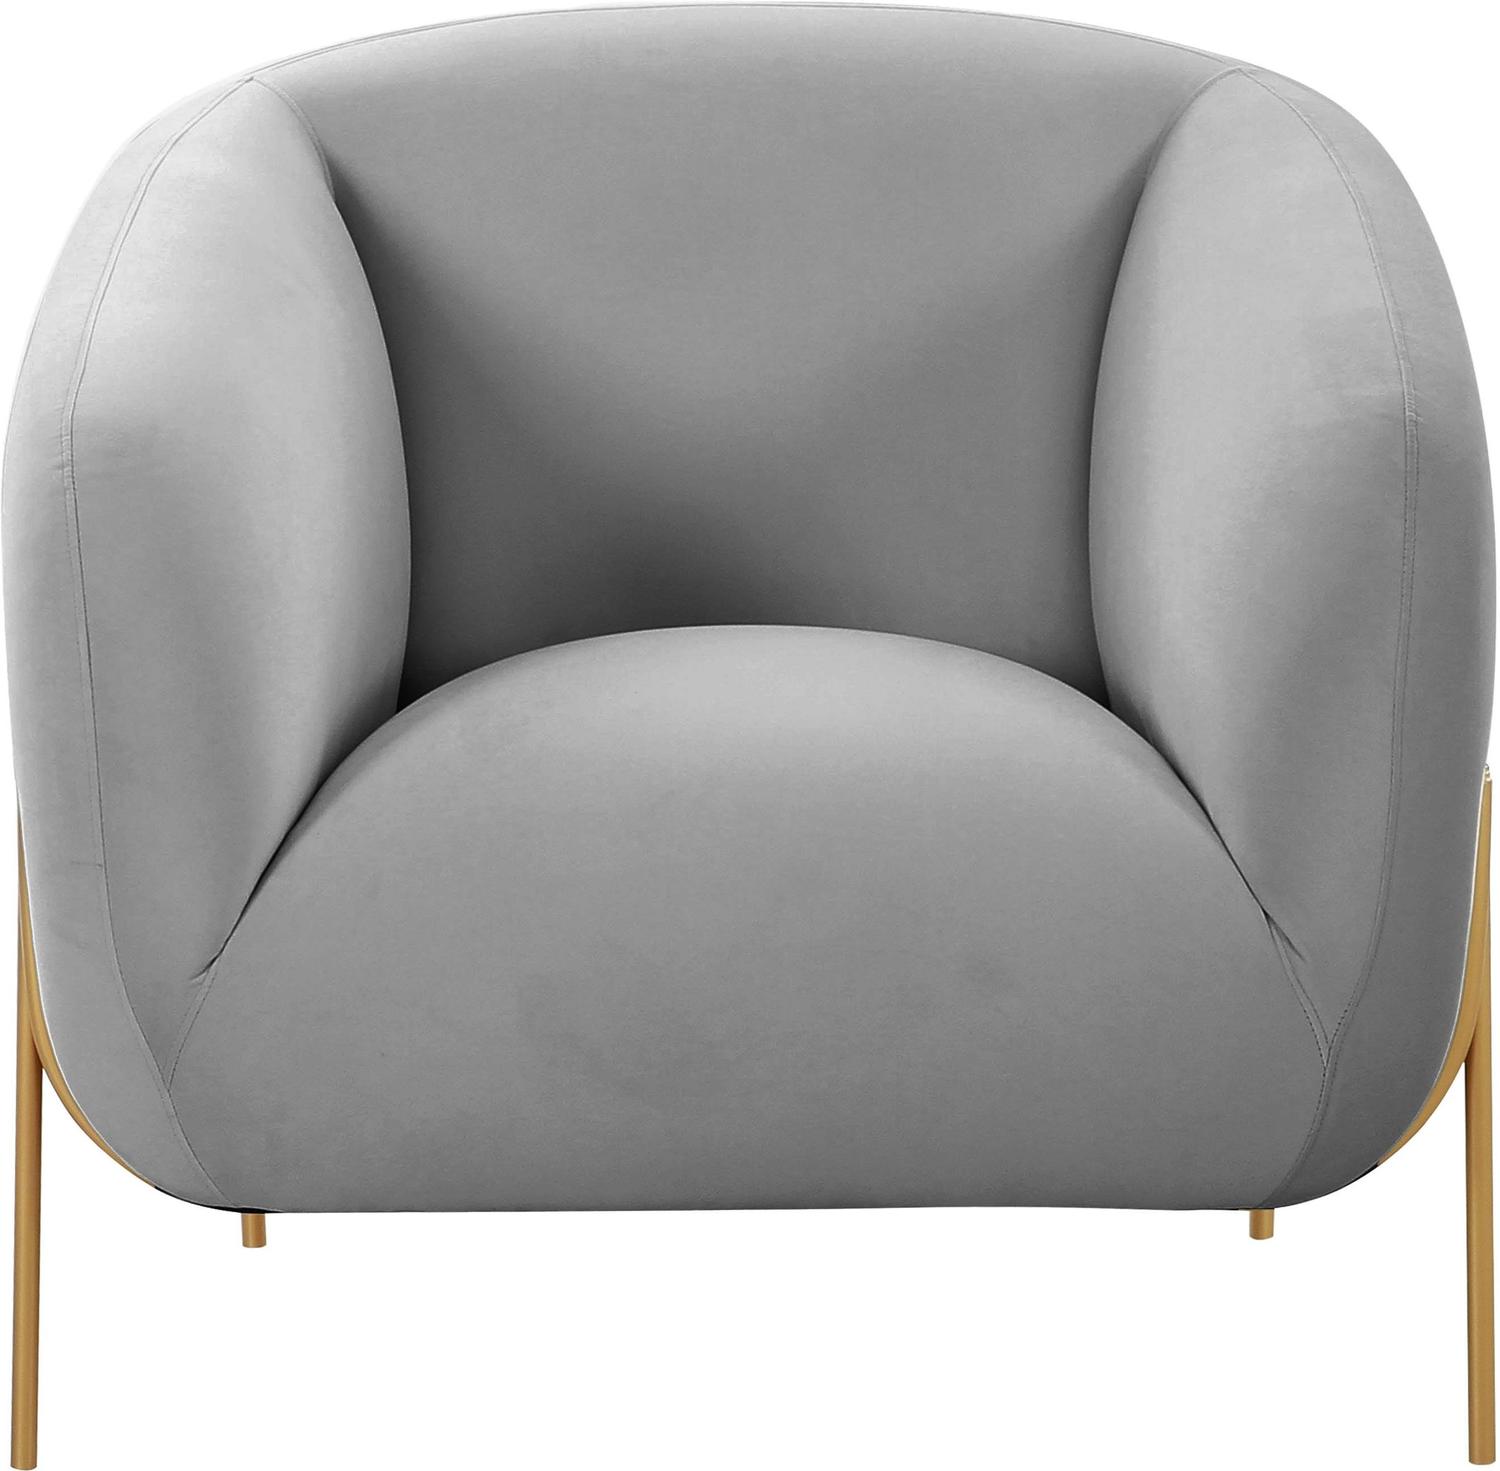 leather reading chair Contemporary Design Furniture Accent Chairs Grey